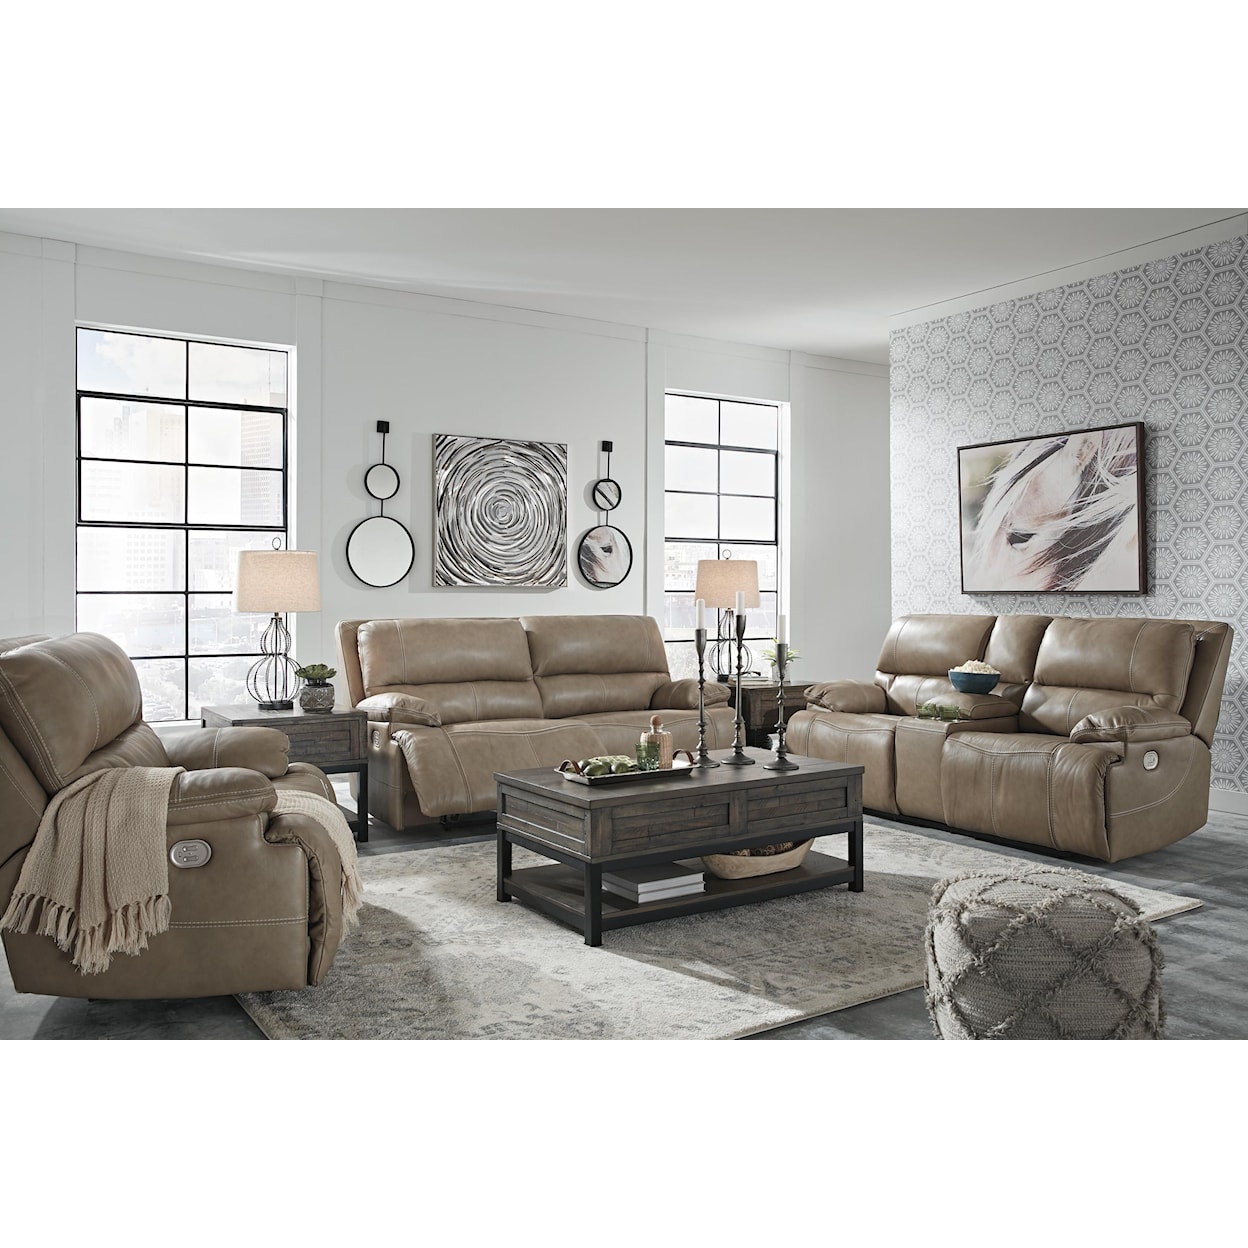 Signature Design by Ashley Ricmen Power Recliner Sofa and Power Recliner Set